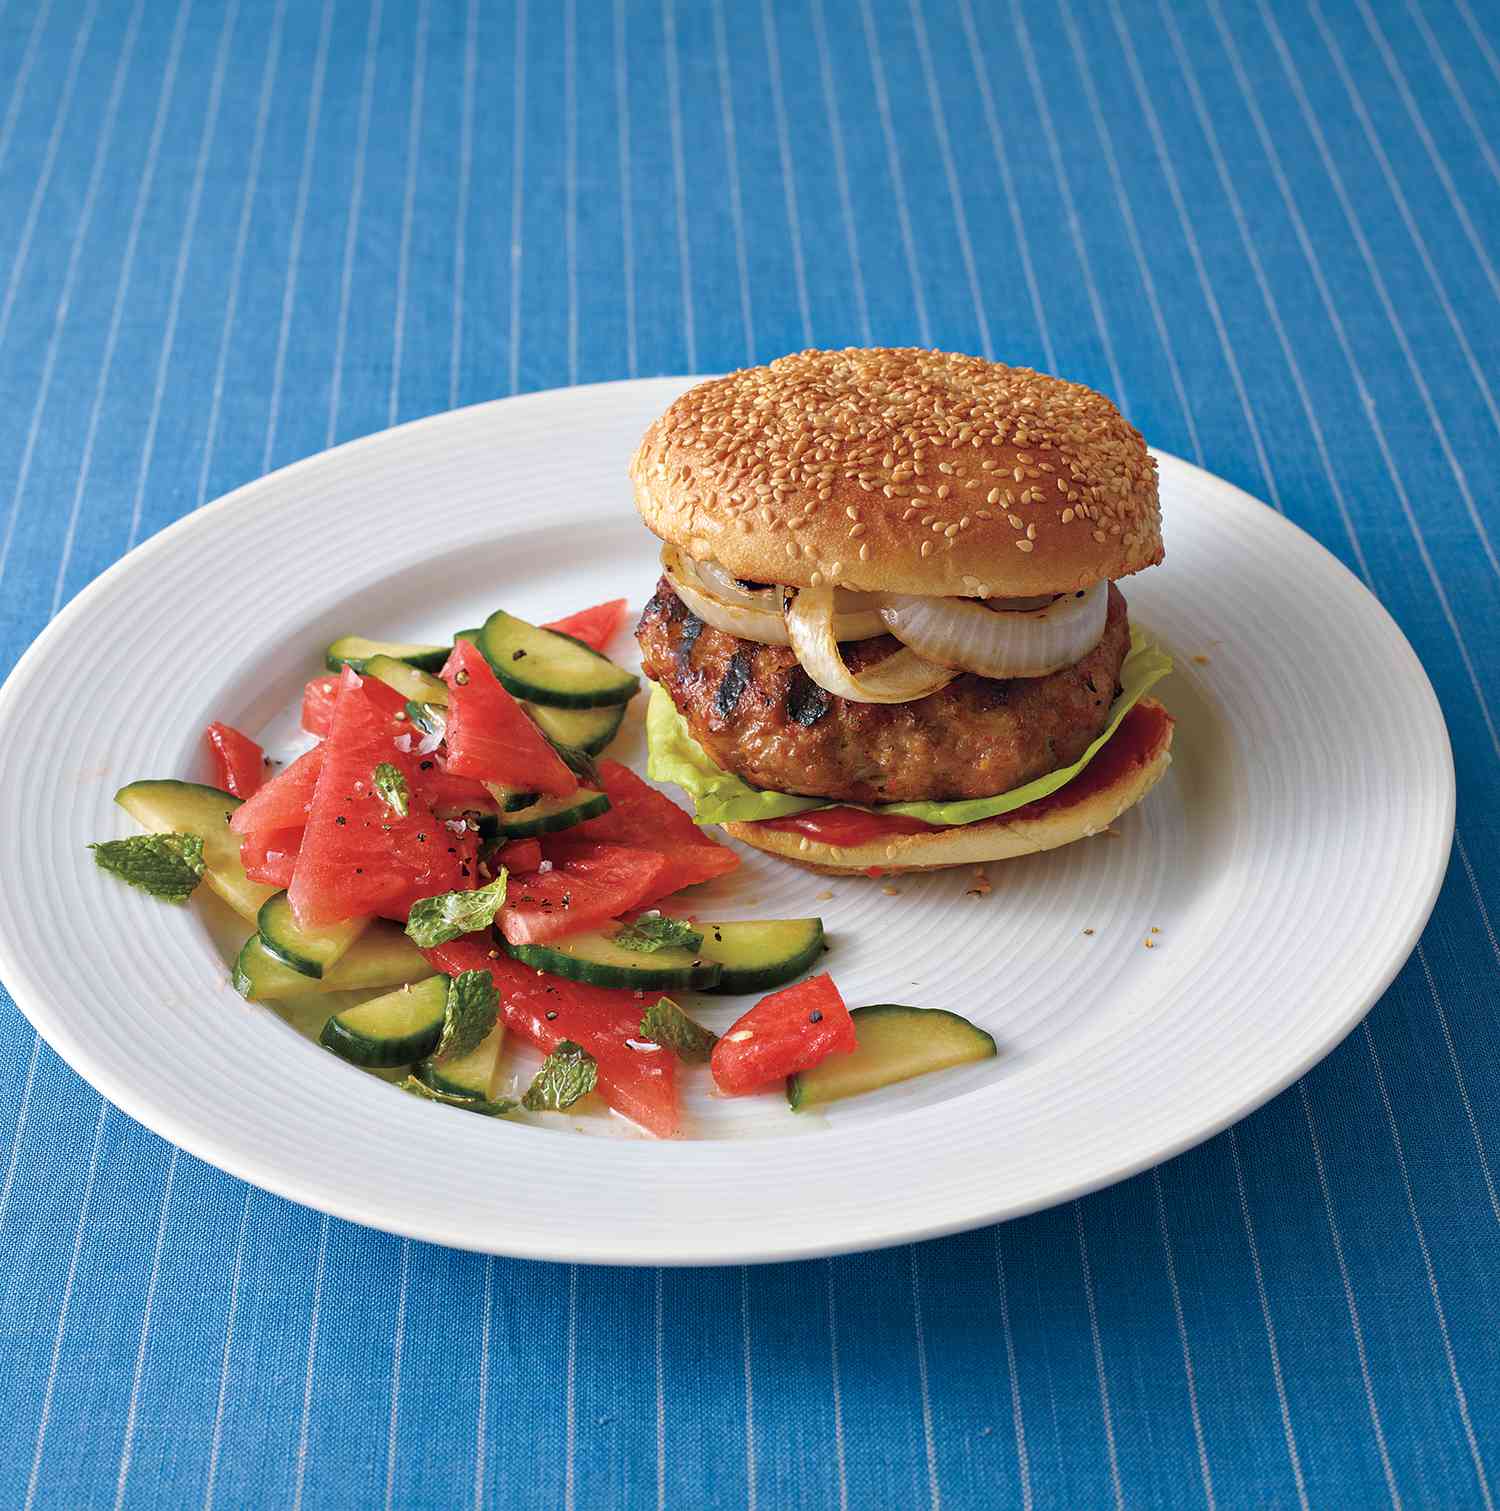 Asian Pork Burgers With Minted Watermelon